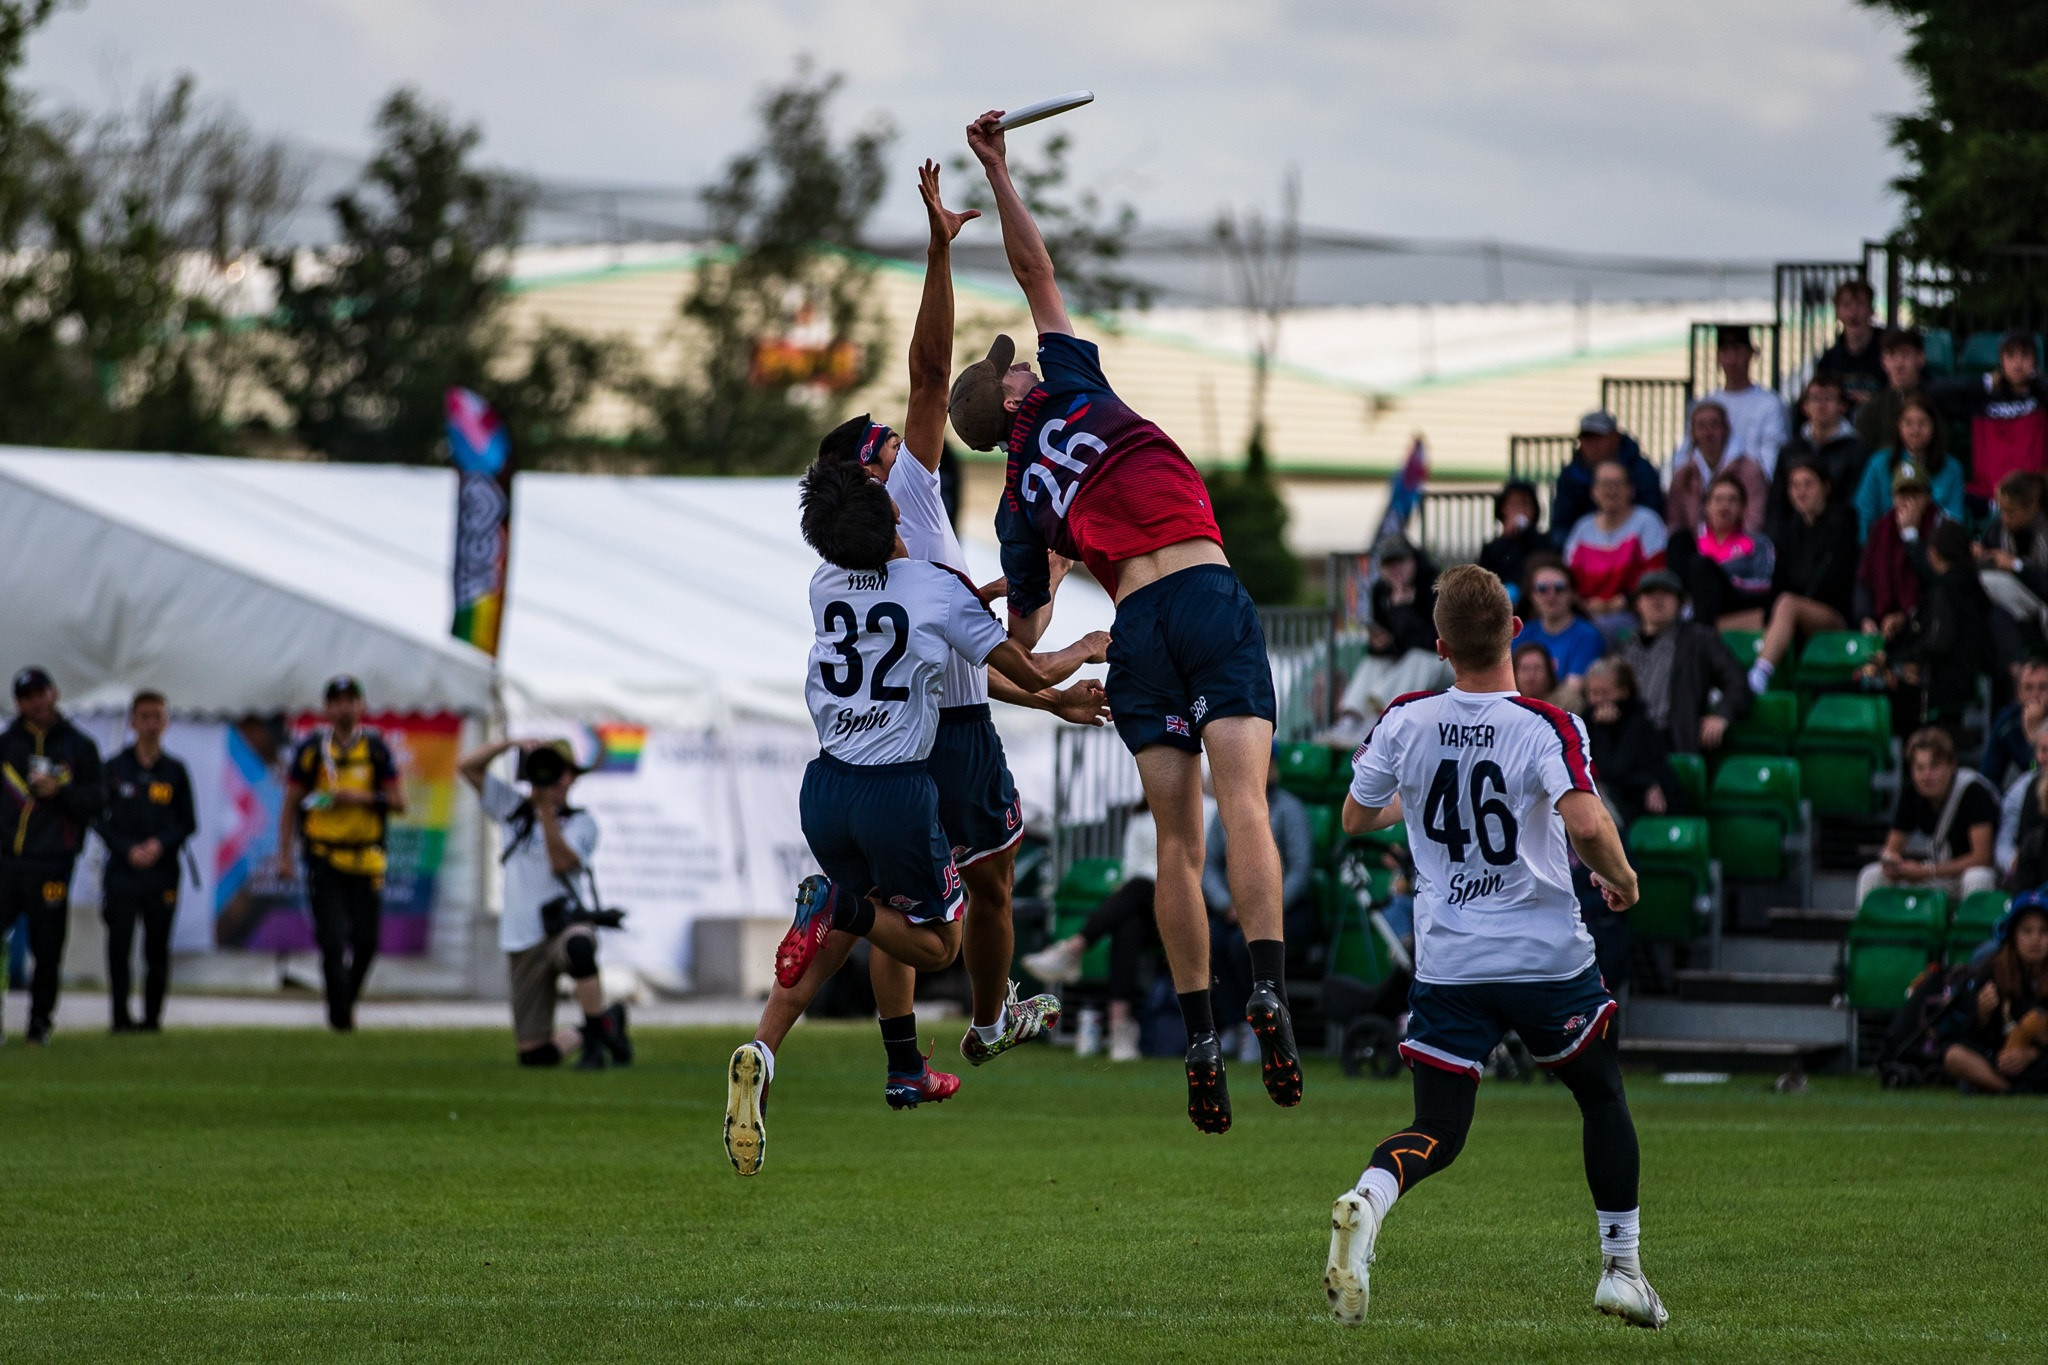 The Nottingham crowd were captivated by the athleticism of the flying disc players ©WFDF